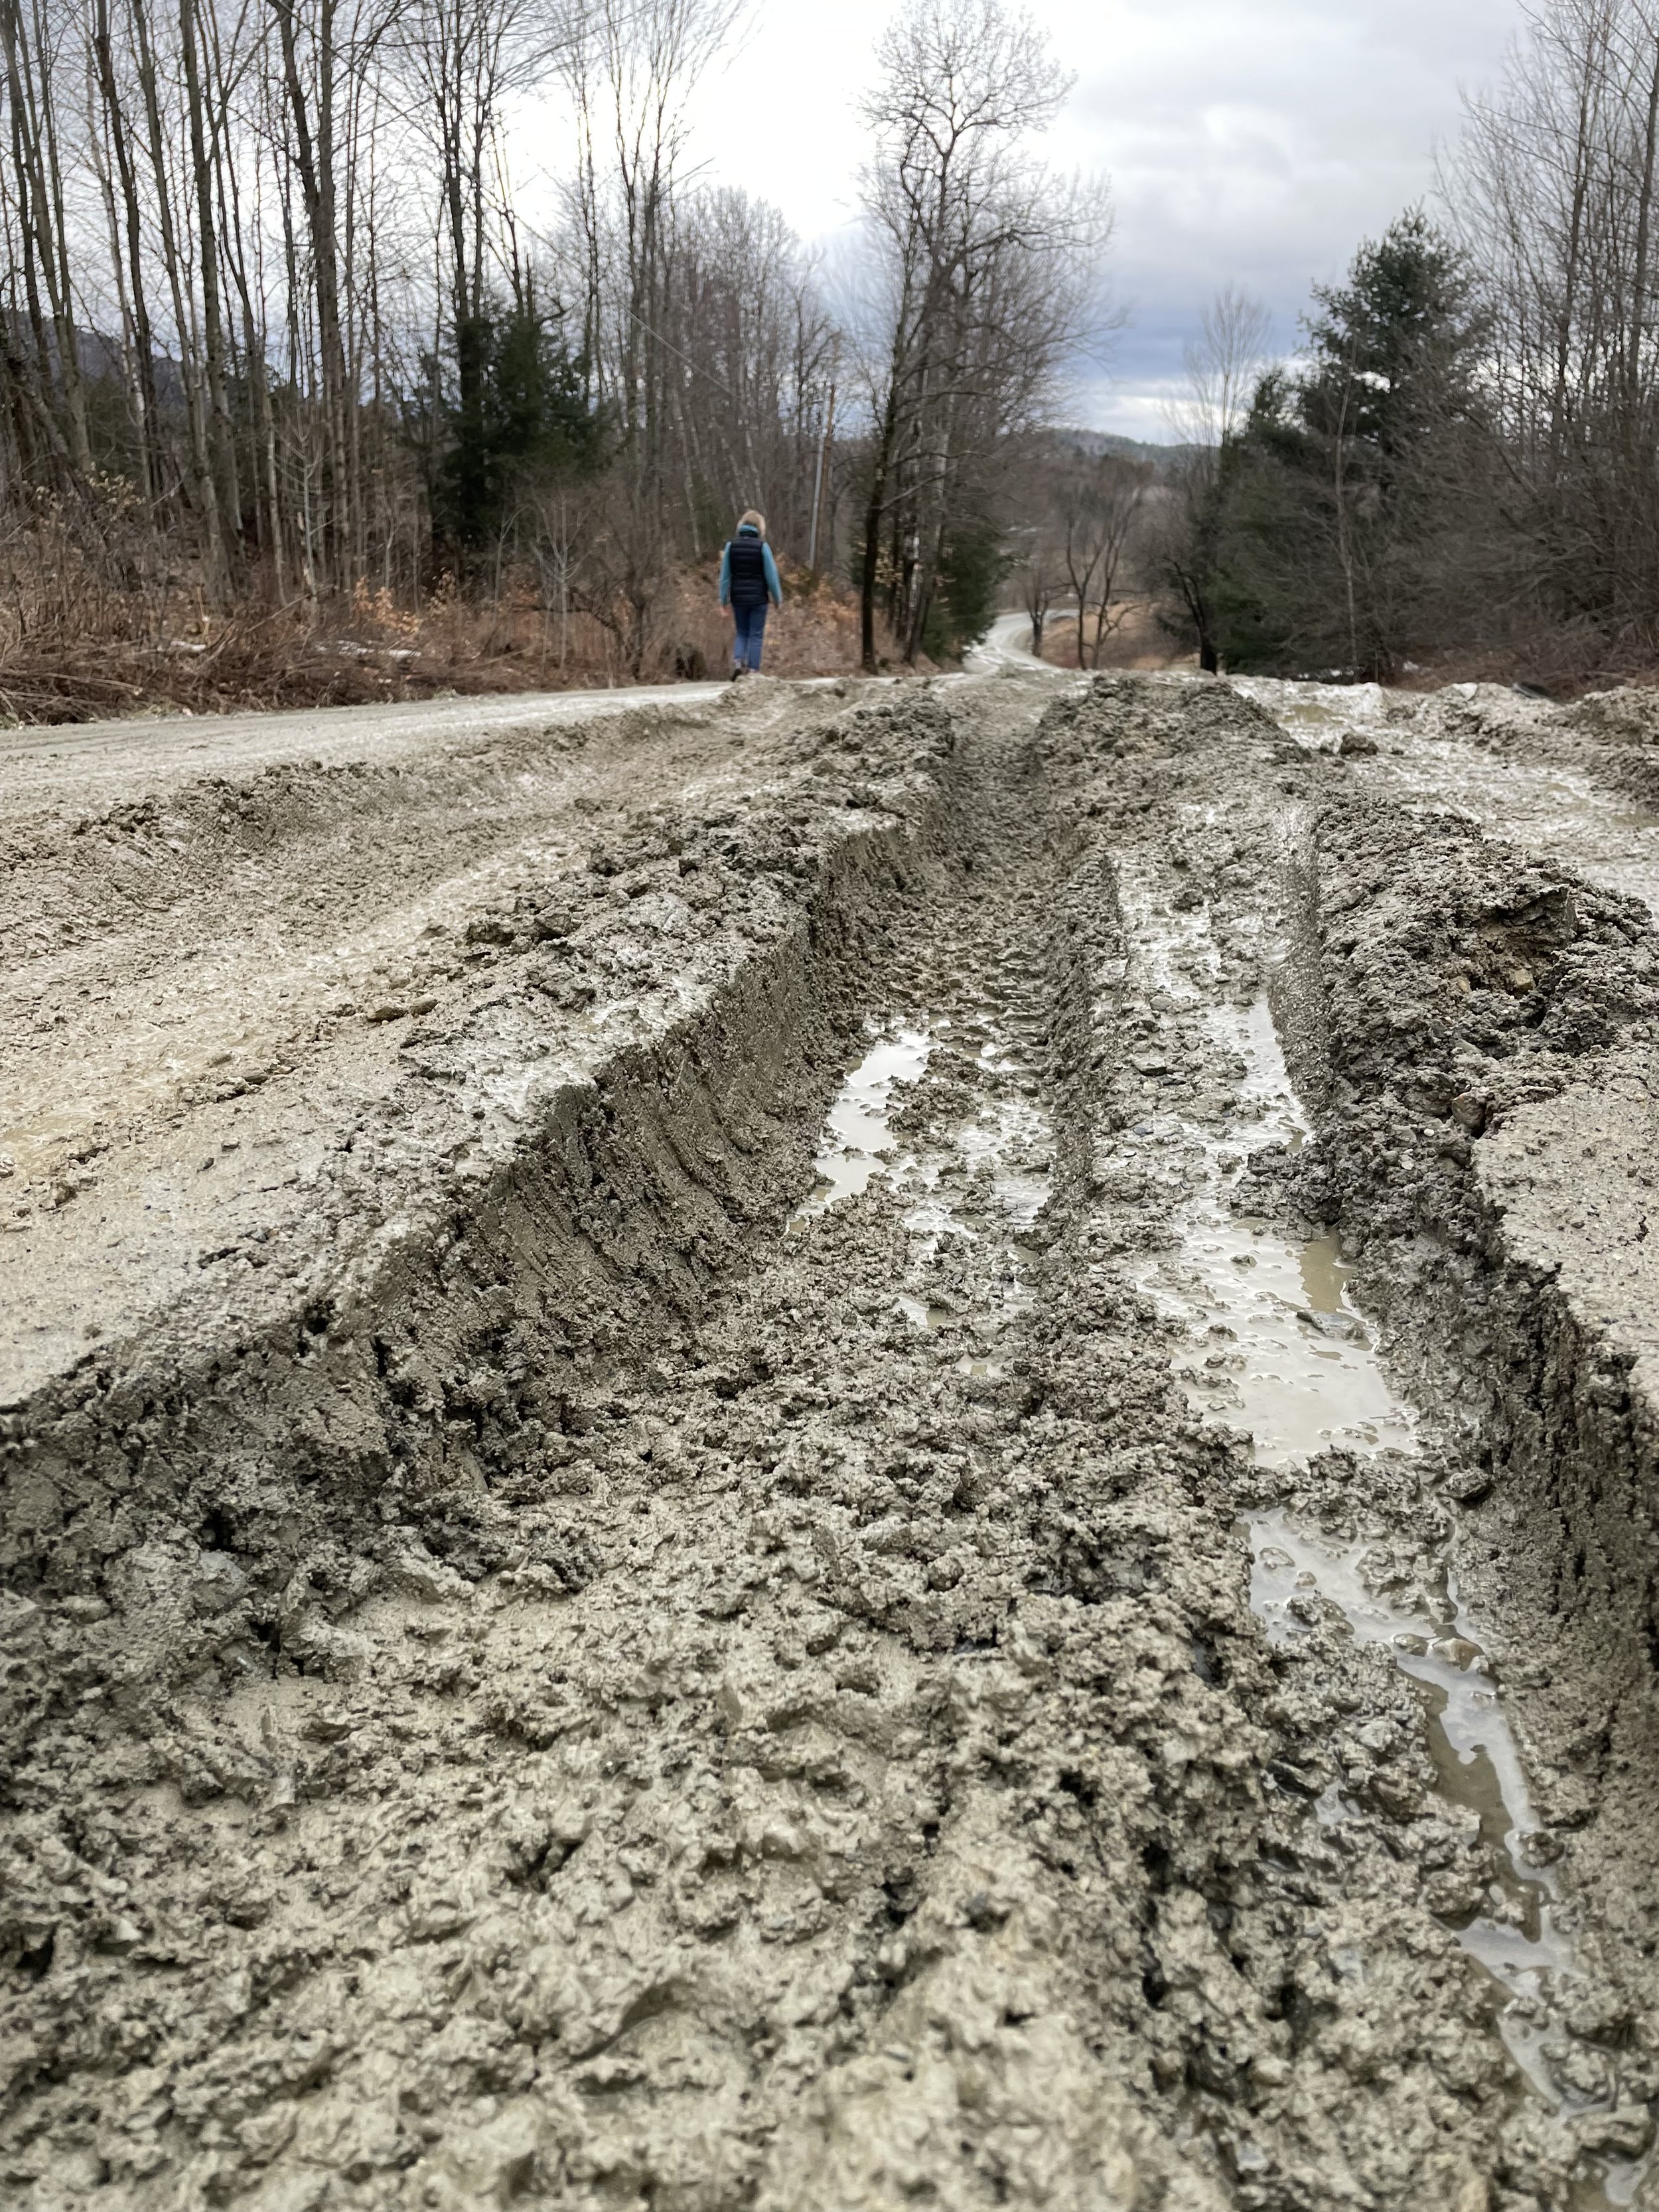  Closeup of a rut on Kneeland Flats Road by Ring Road which was better suited for walking than driving last week. Photo by Tom Strasser 